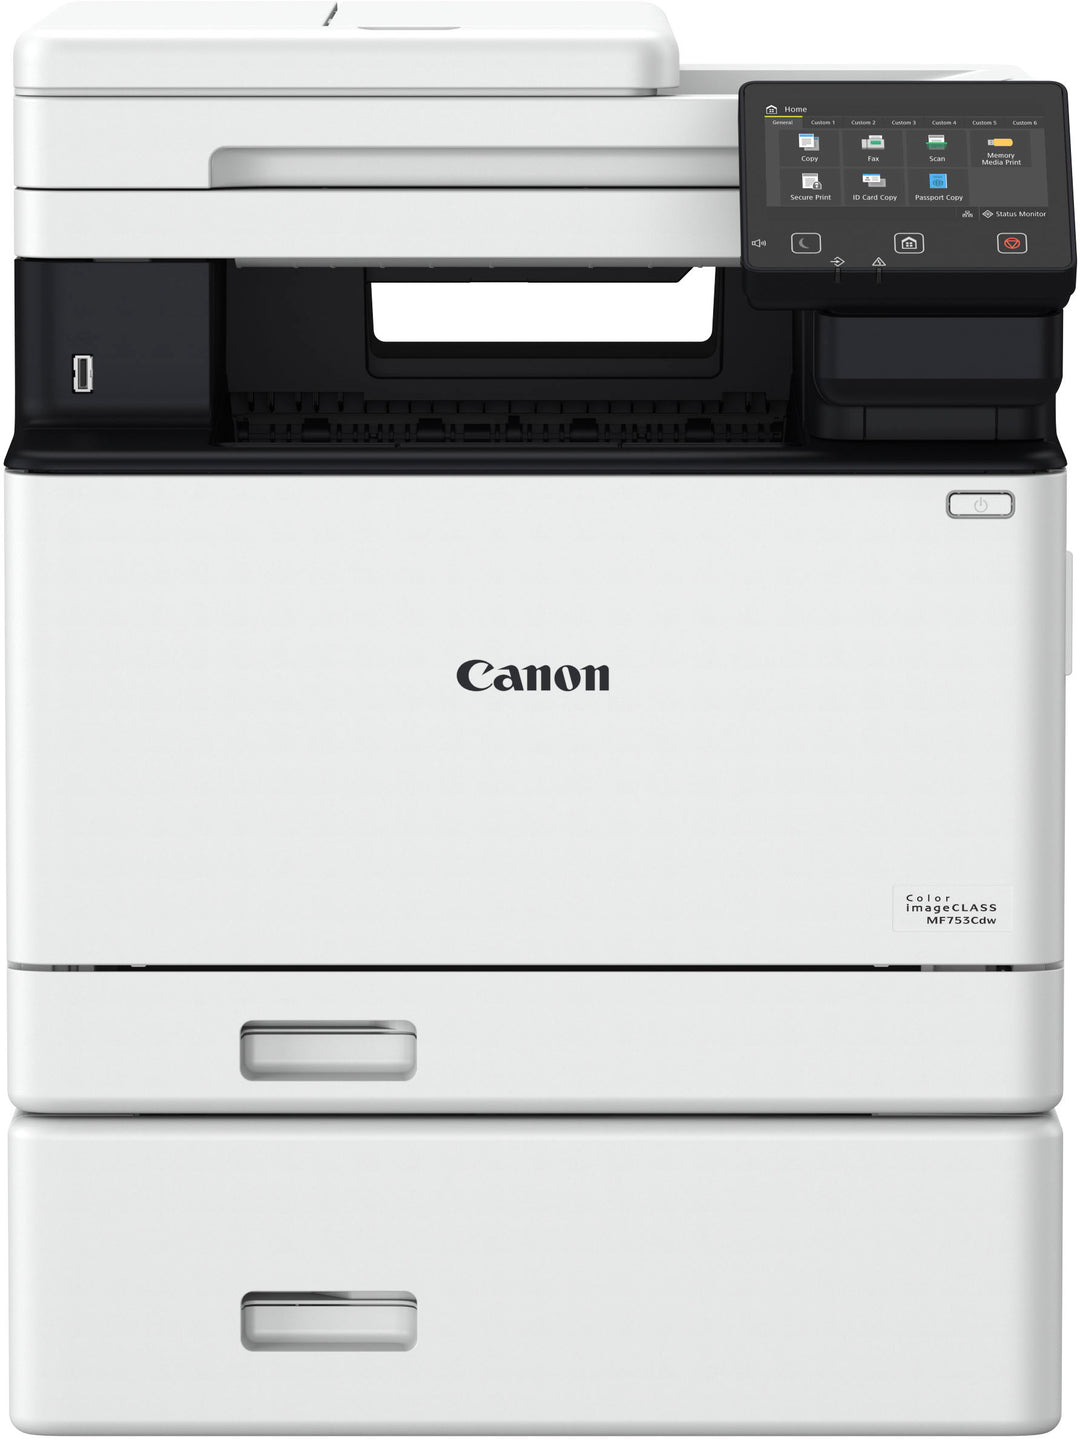 Canon - imageCLASS MF753Cdw Wireless Color All-In-One Laser Printer with Fax - White_3